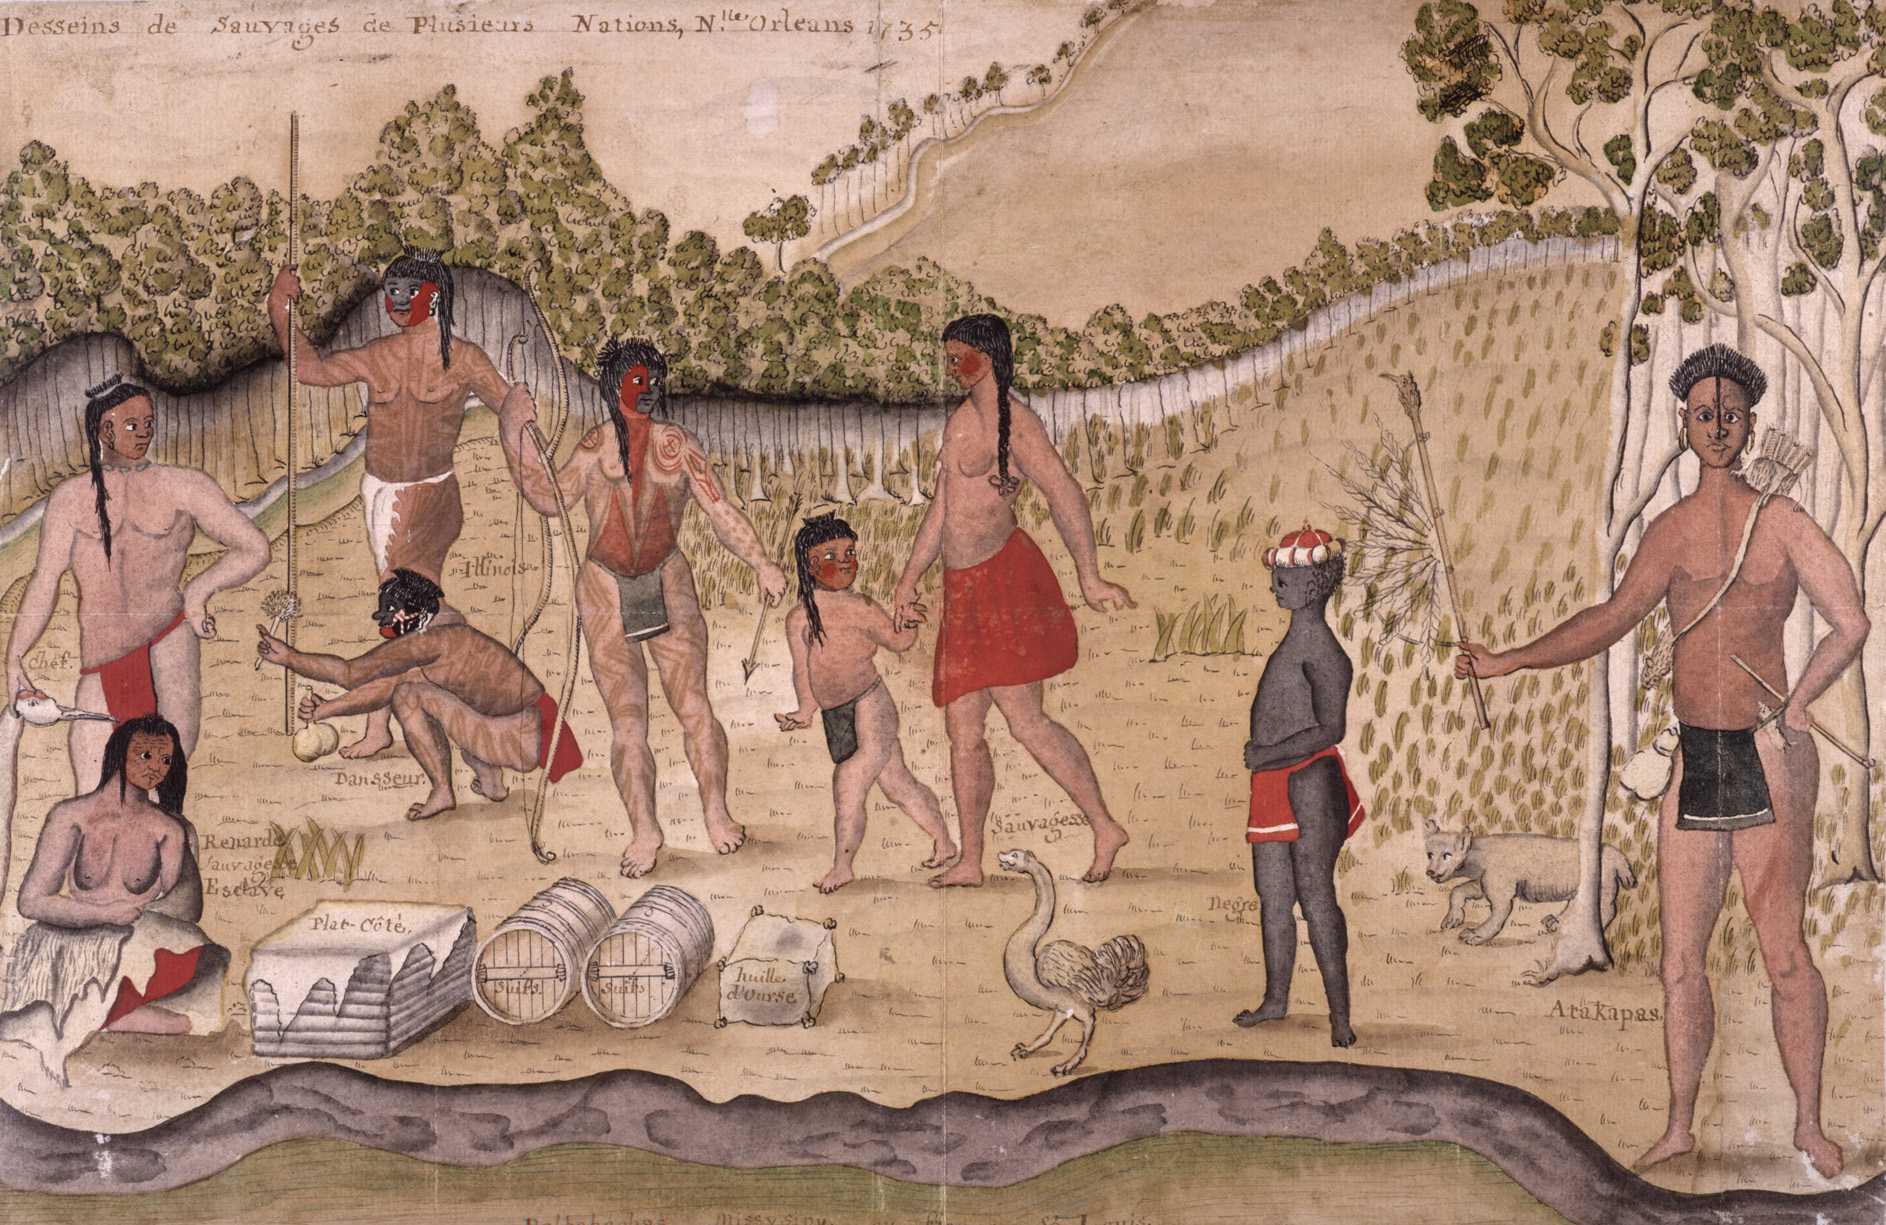 Color painting of Native Americans alongside one enslaved person